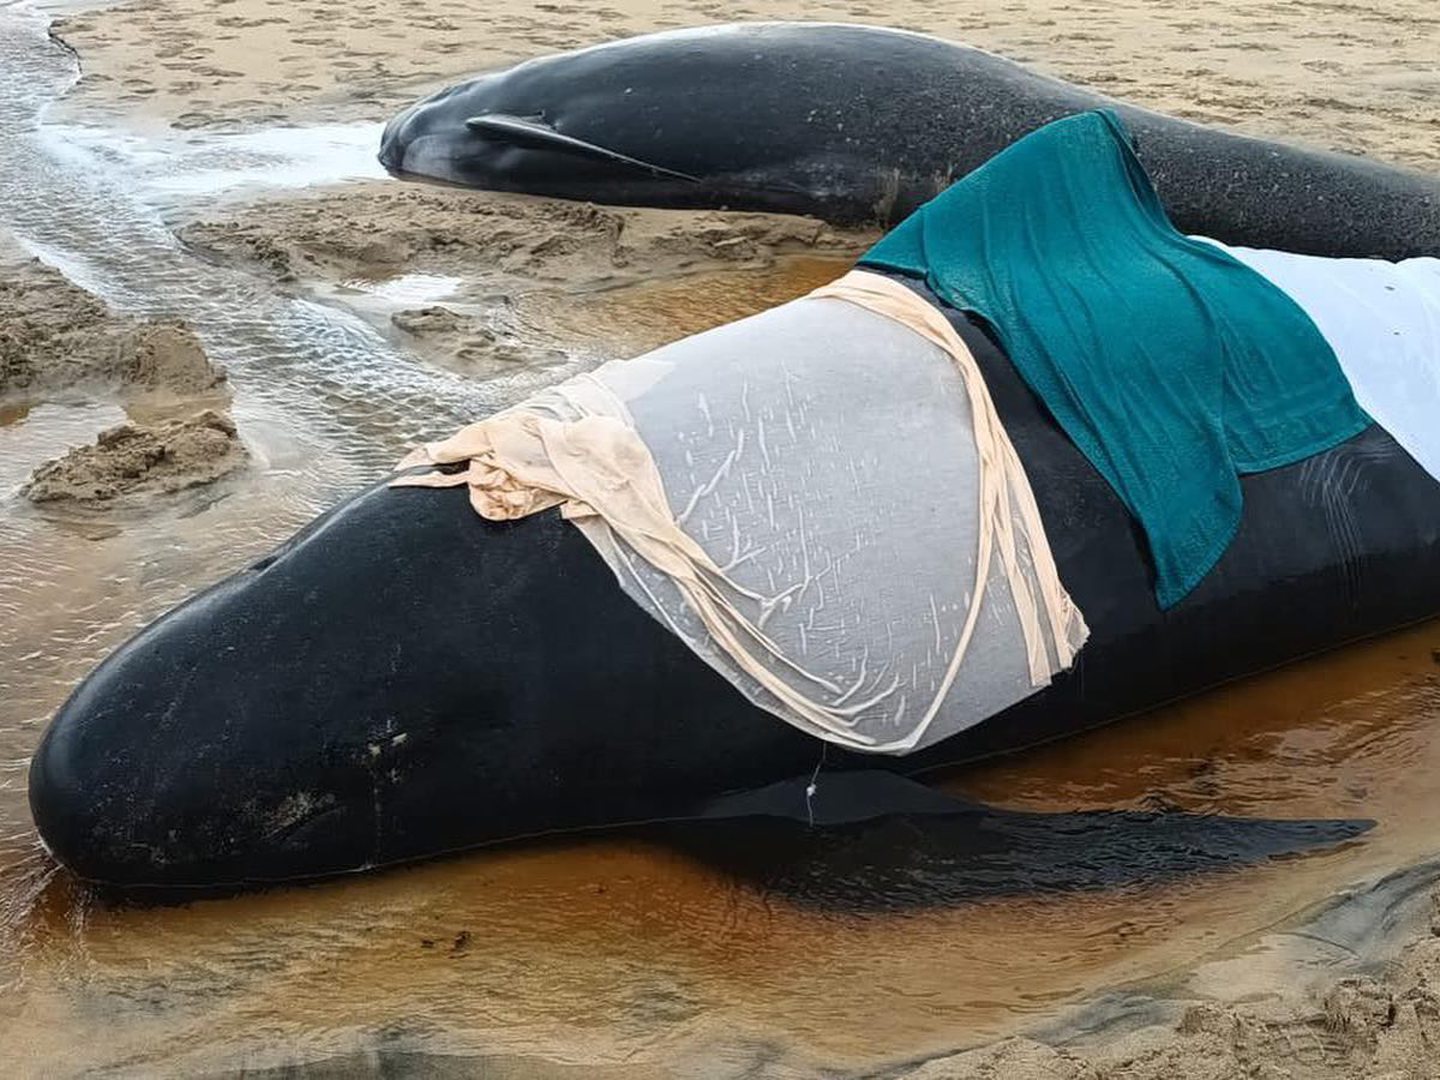 Towels draped across two pilot whales on the sand. 